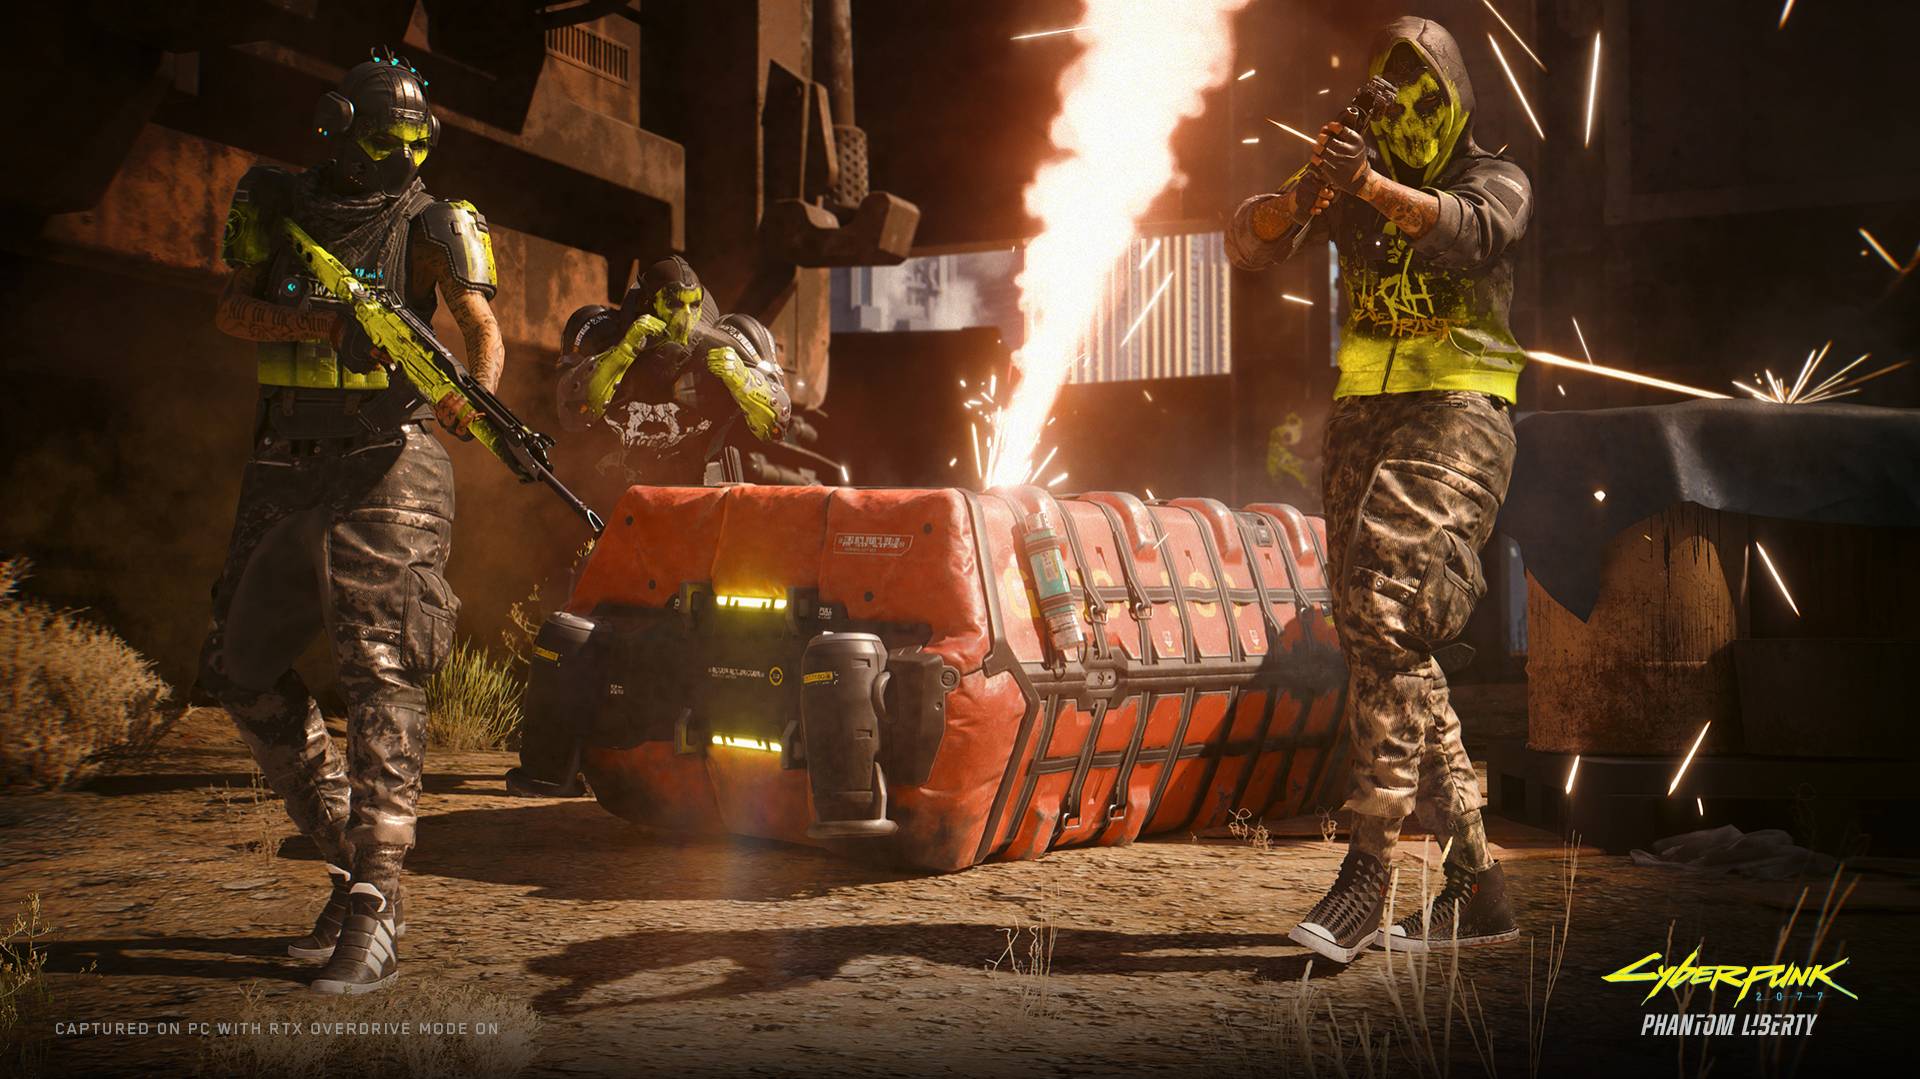 A group of armed mercenaries defending a bright red supply box in Cyberpunk 2077.